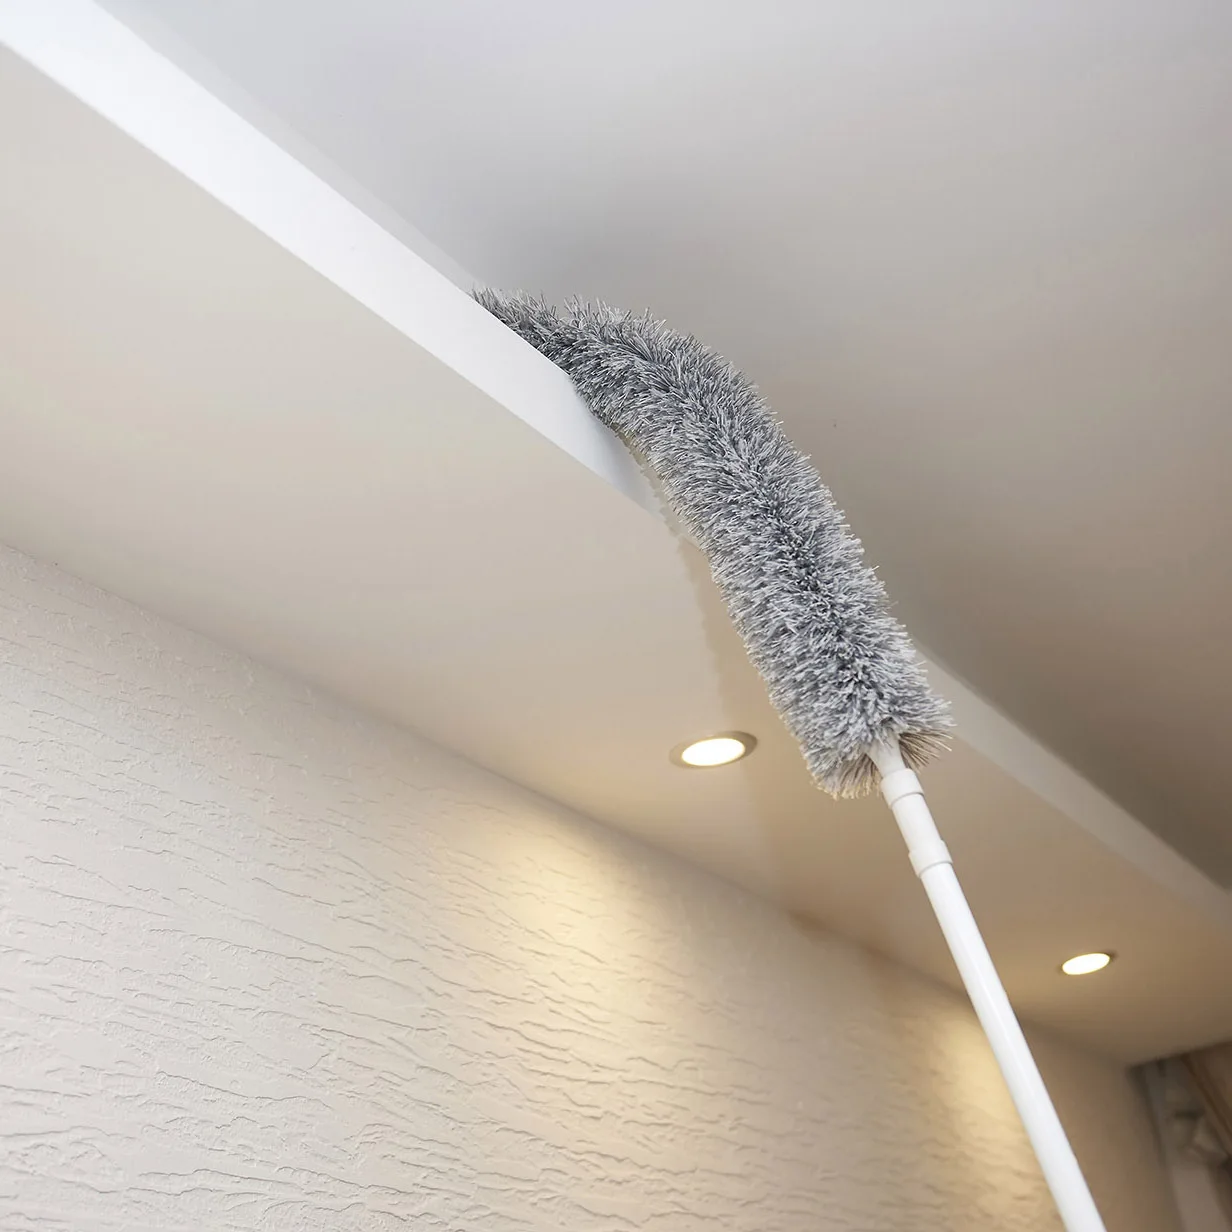 Lazy microfiber dusting duster household feather duster dusting bendable retractable cleaning duster dust cleaner